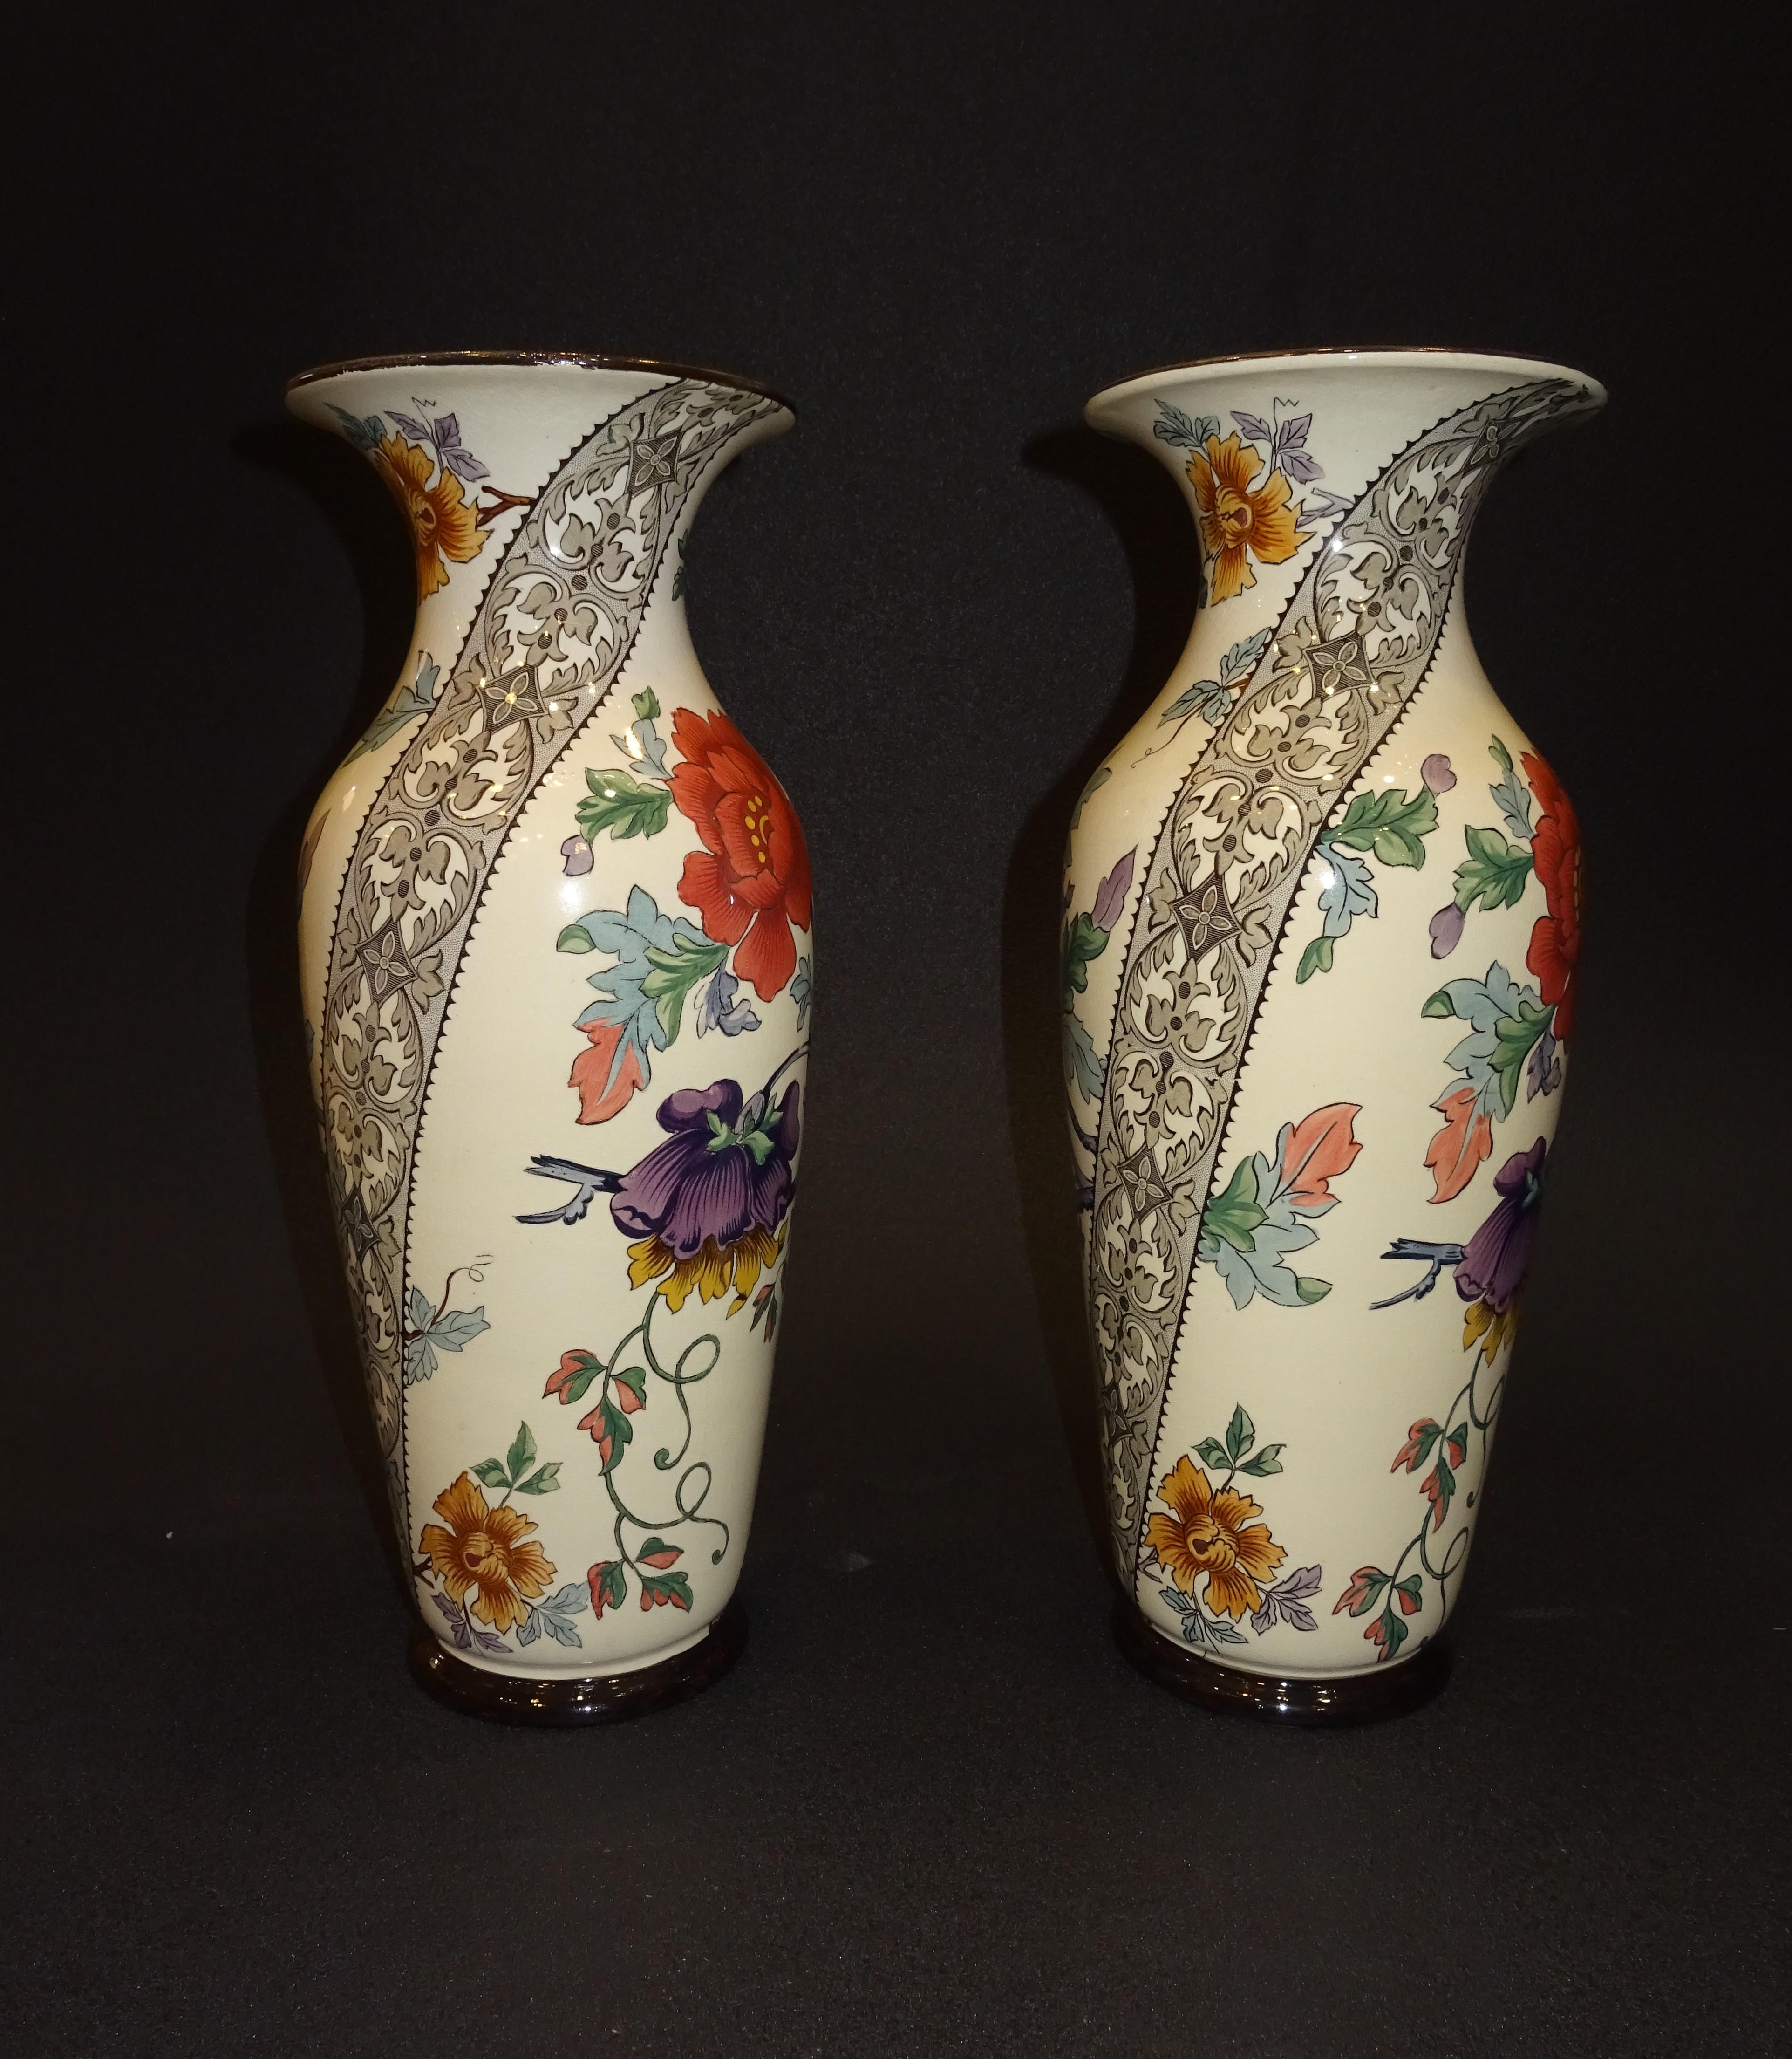 Outstanding pair of French ceramic vases with red and purple poppies and lace border as decoration, the manufacture is Gien, France (1875-1984), it was specialized in the elaboration of table and ornamental pieces as well as tiles, it has an